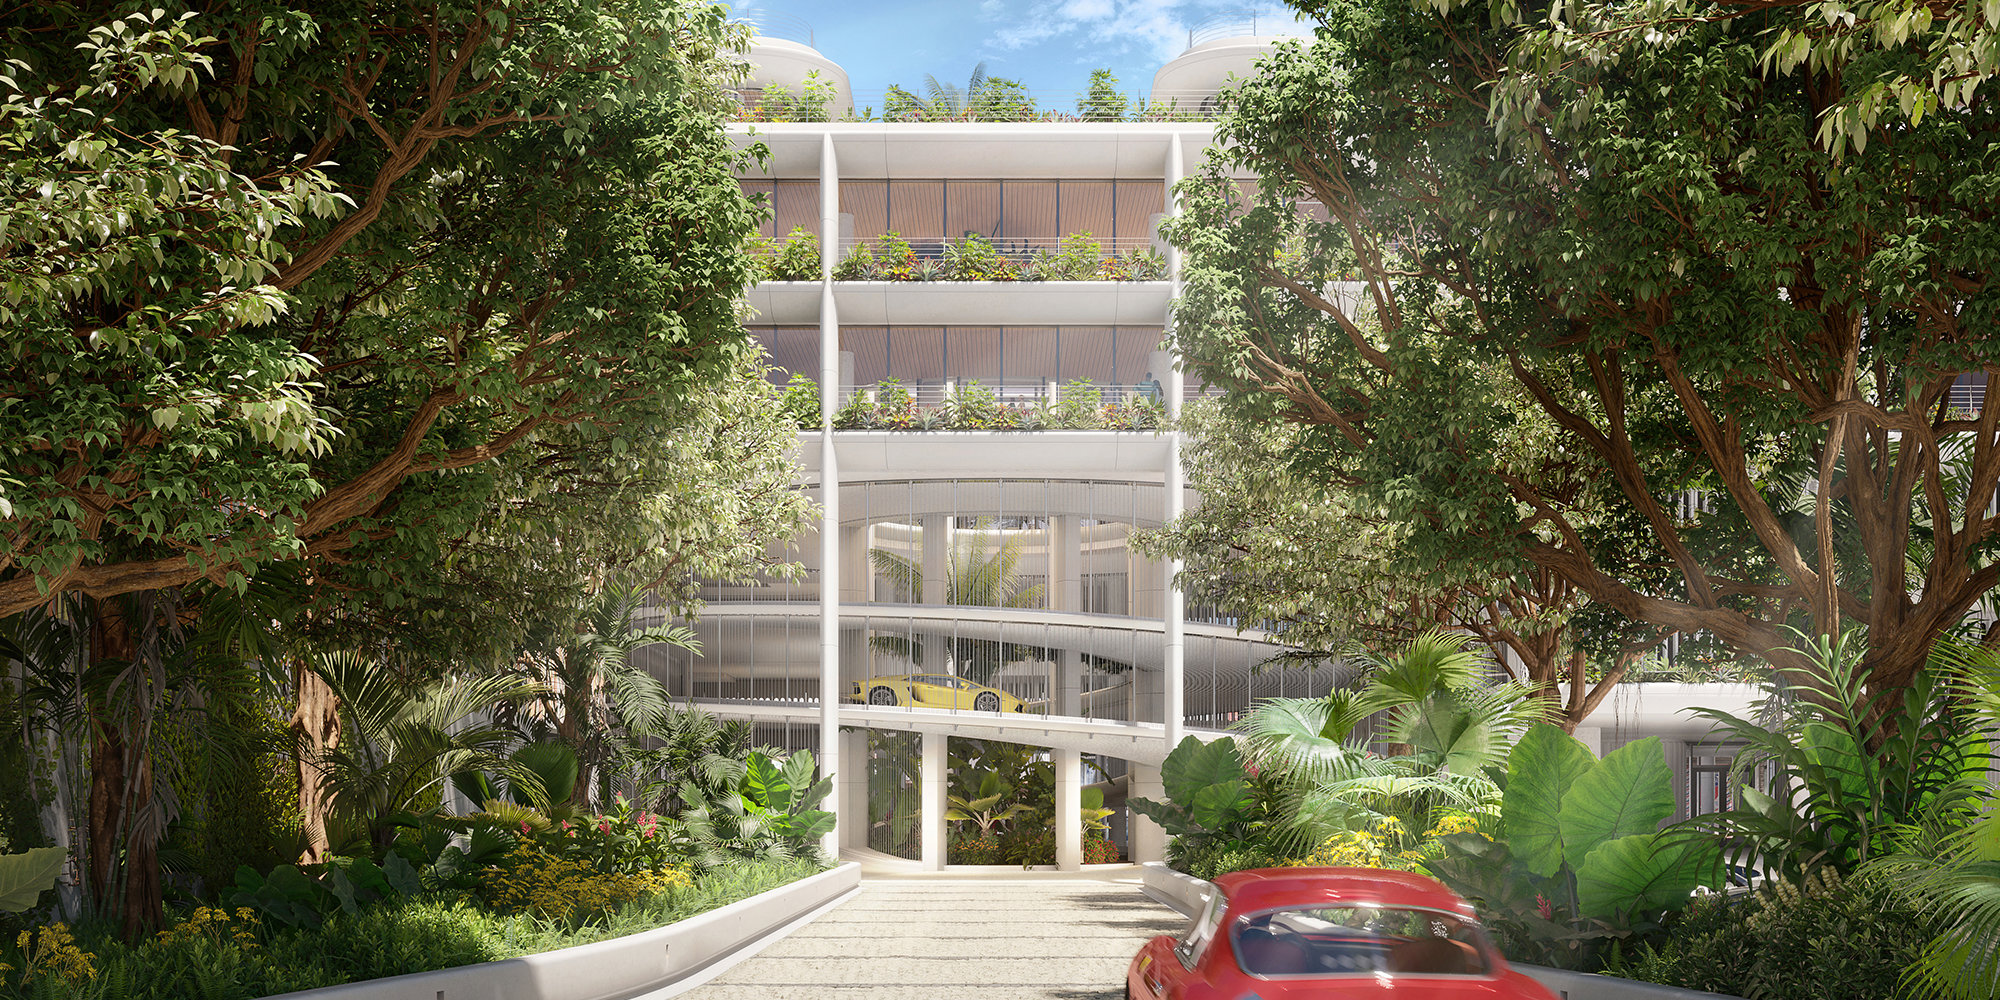 Designs For Mixed-use Building On Miami Beach’s Alton Road Revealed